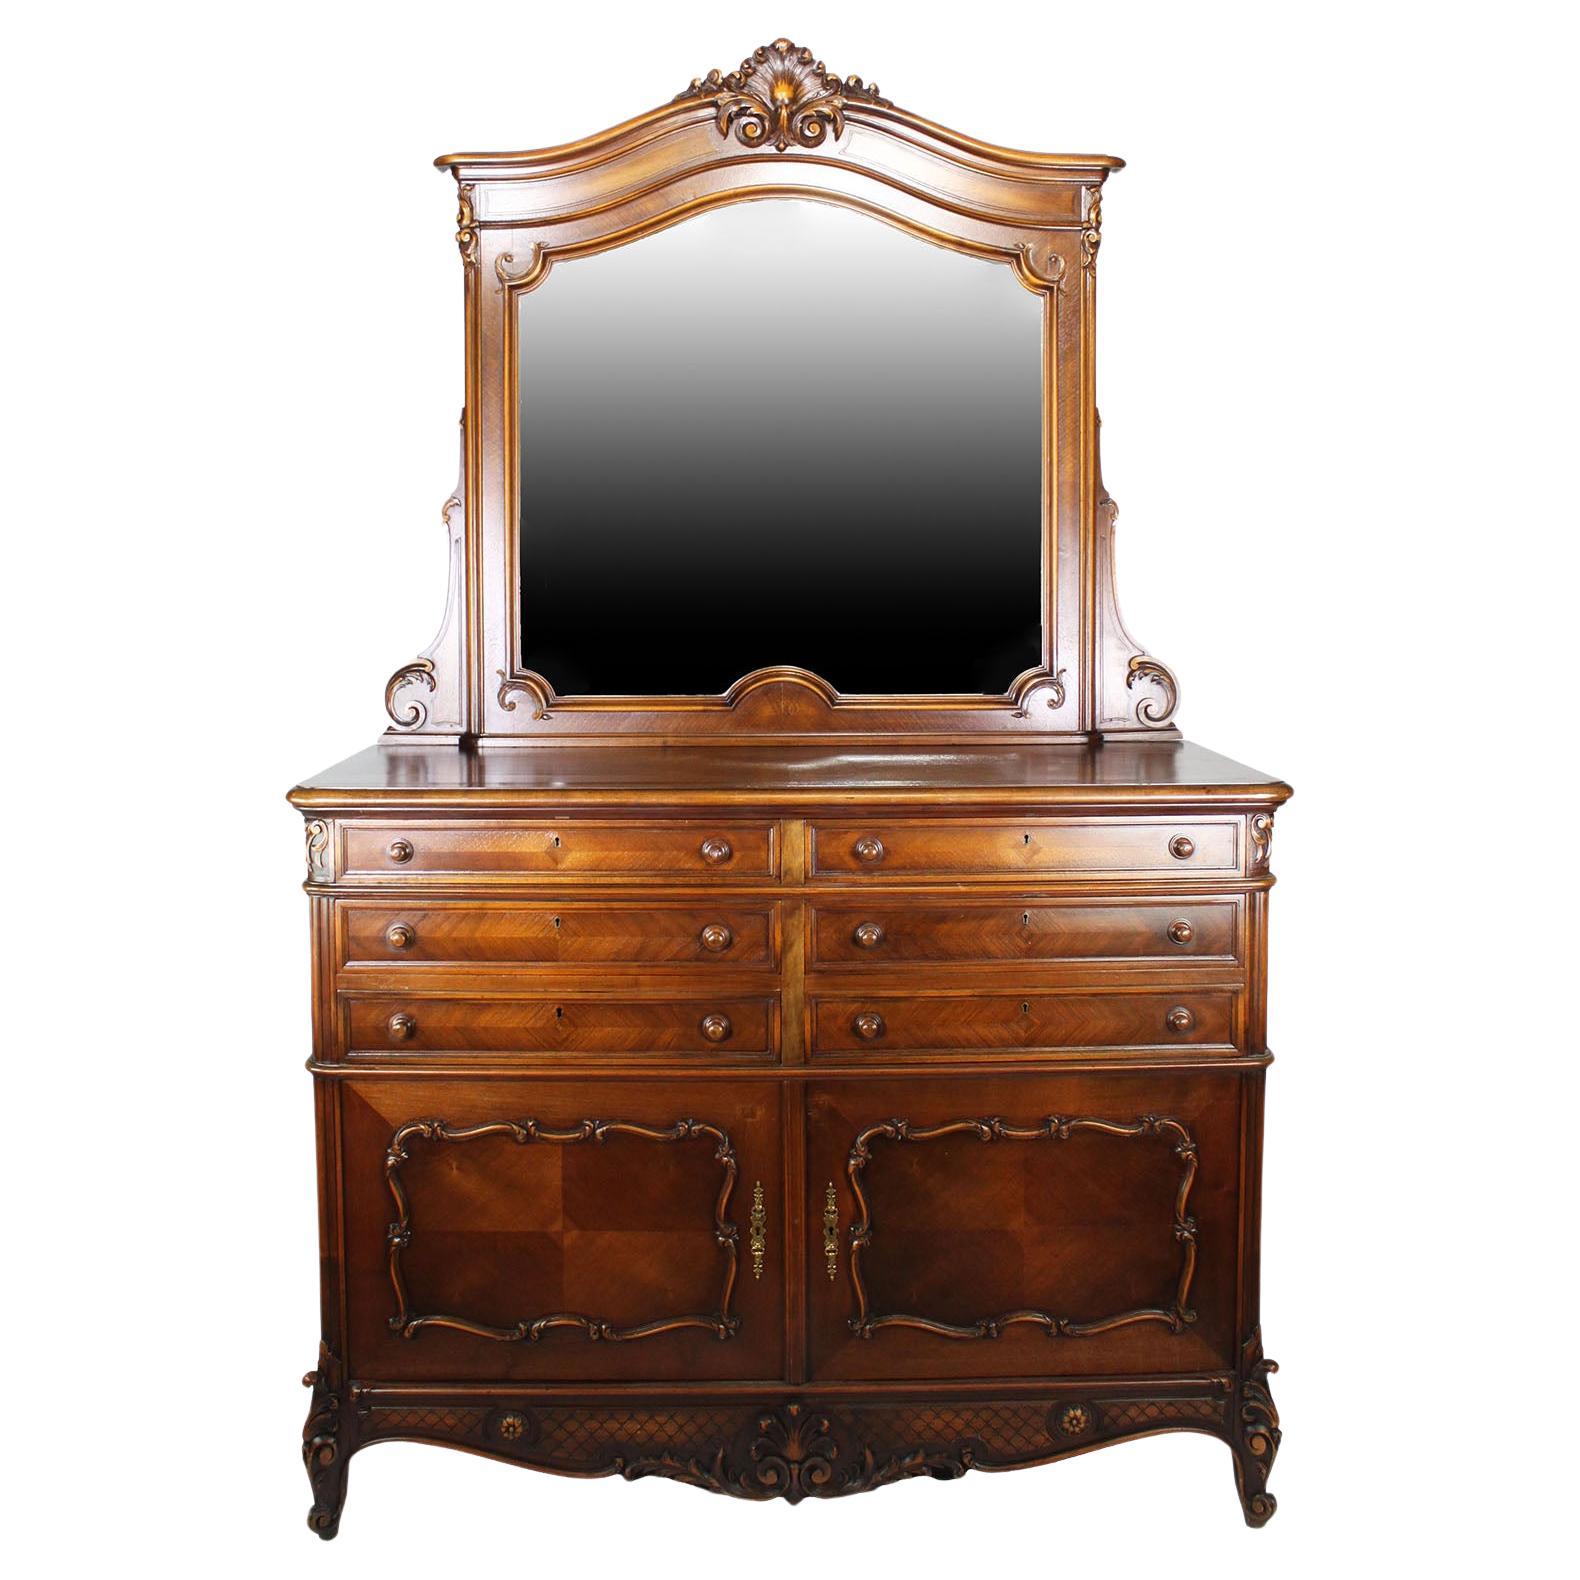 Country French 19th/20th Century Louis XV Provençal Style Carved Walnut Vanity For Sale